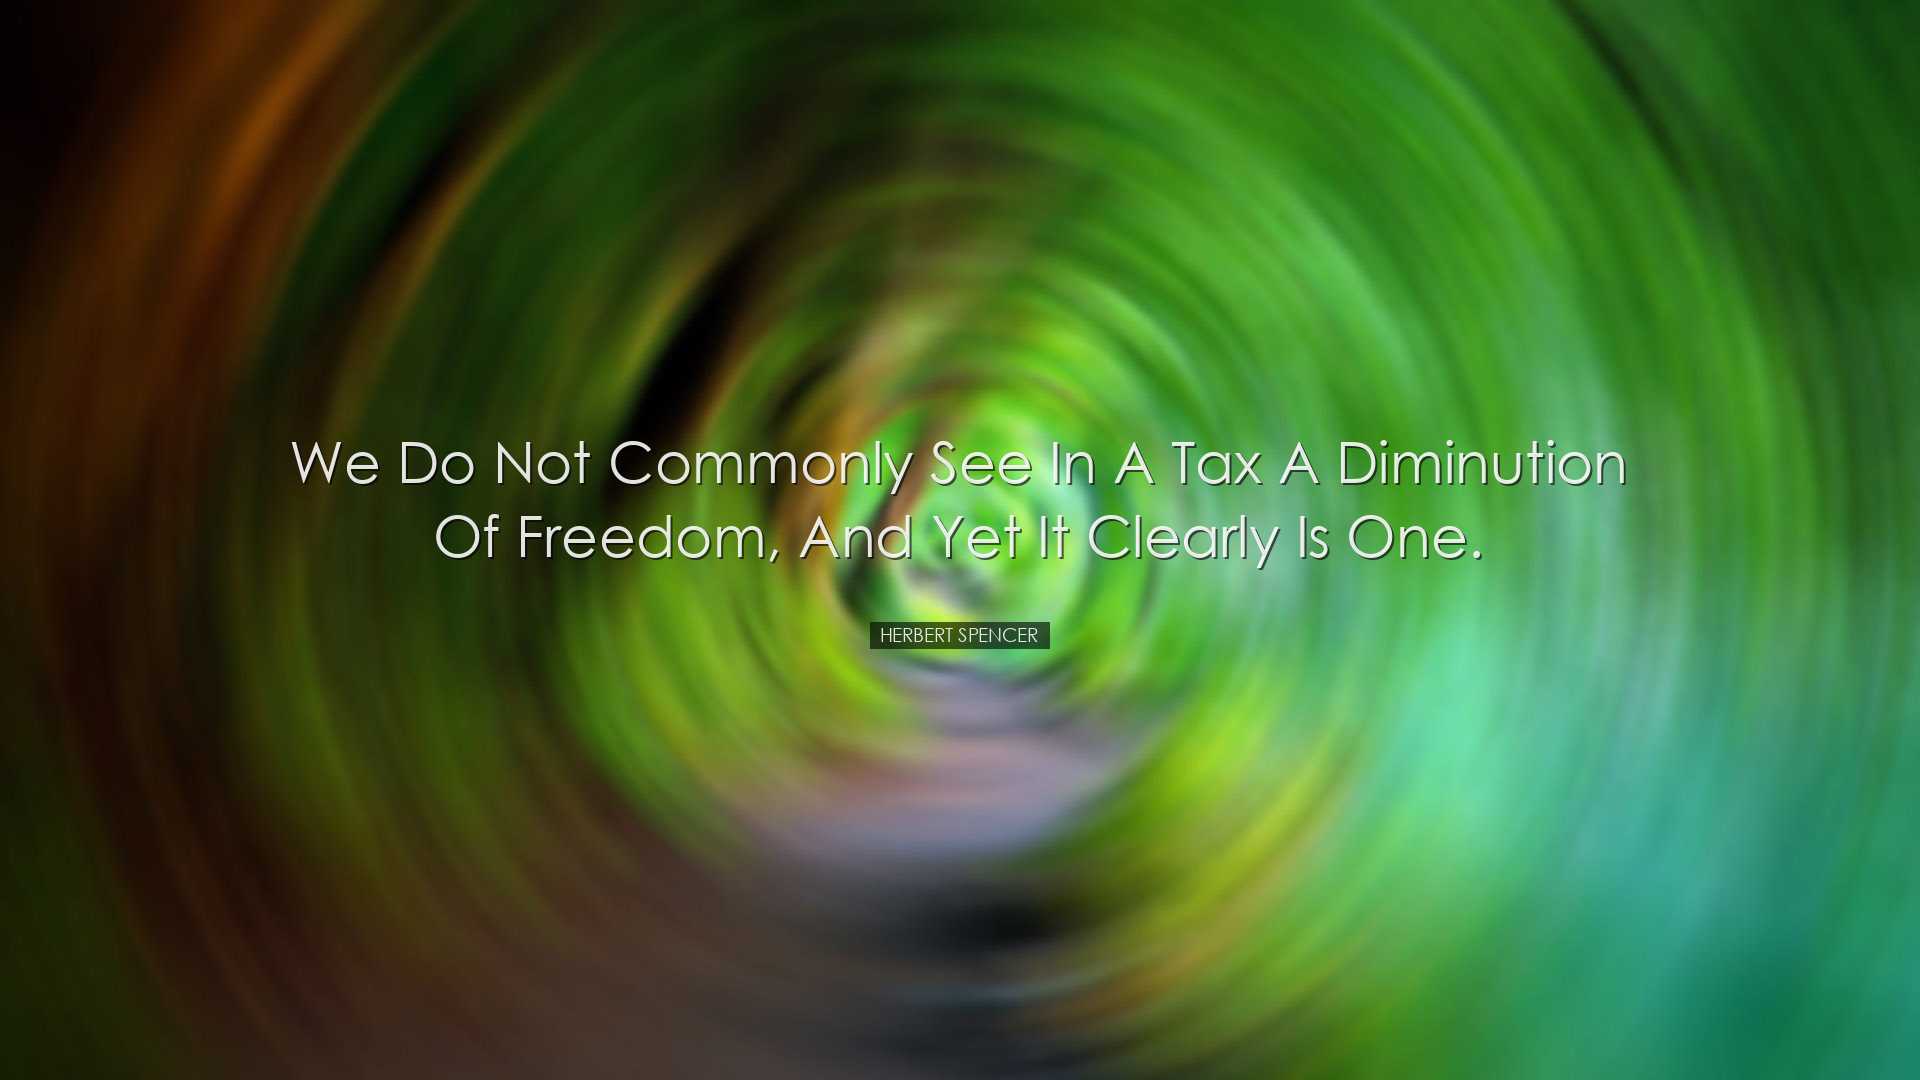 We do not commonly see in a tax a diminution of freedom, and yet i